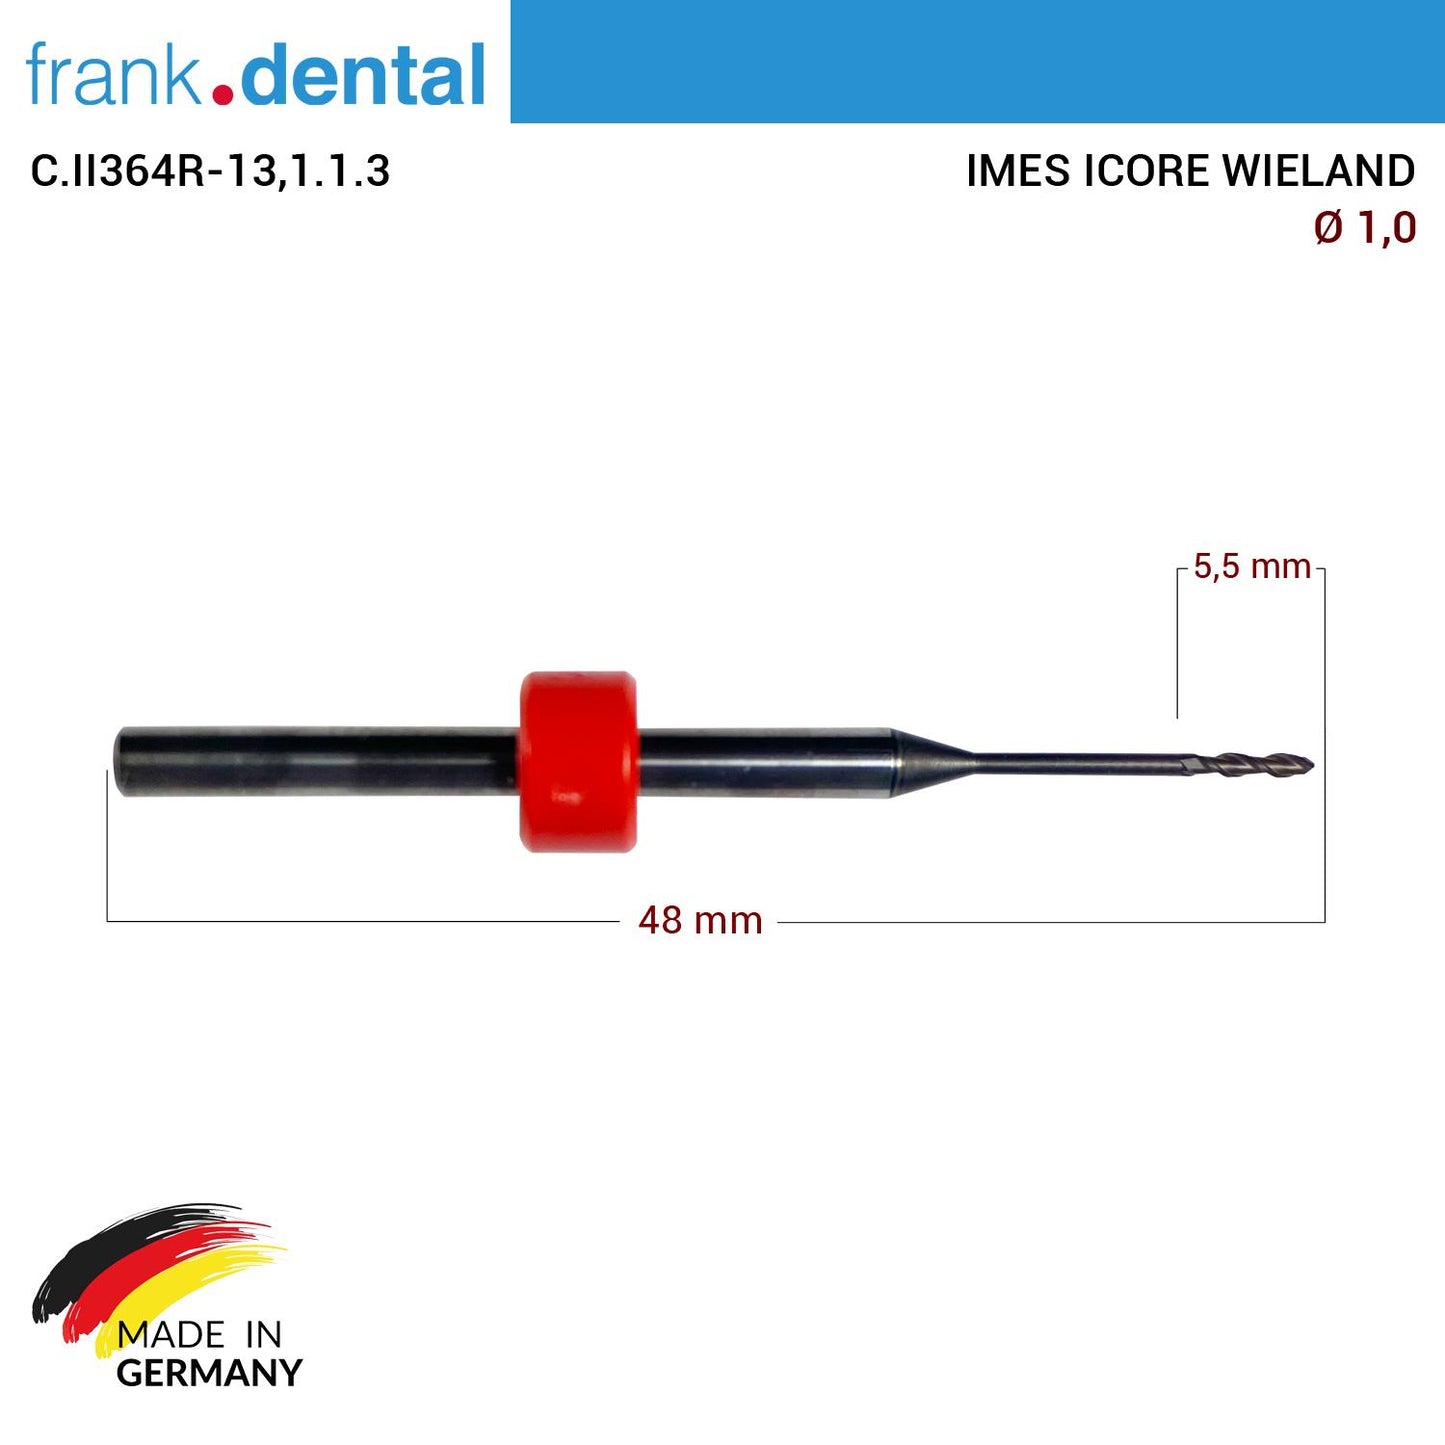 Imes Icore Wieland Cad Cam Drill 1.0 mm